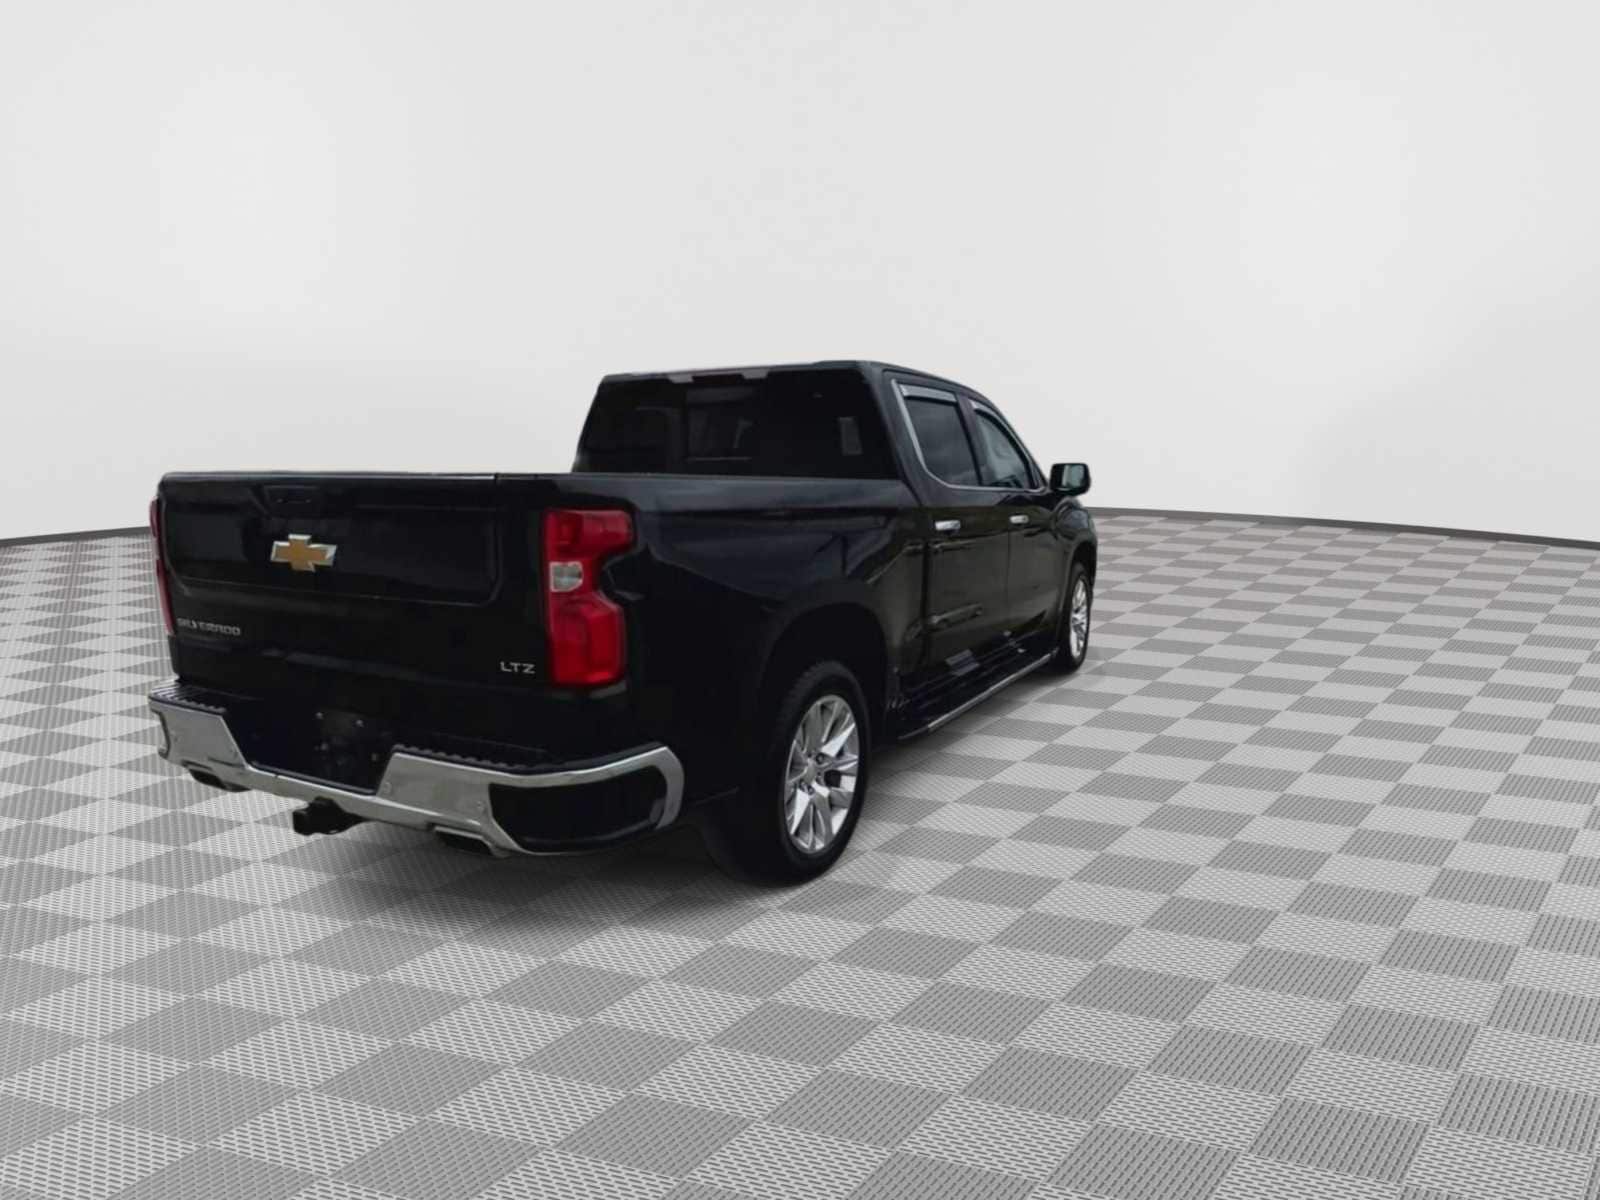 Used 2021 Chevrolet Silverado 1500 LTZ with VIN 3GCUYGED8MG362061 for sale in Wasilla, AK